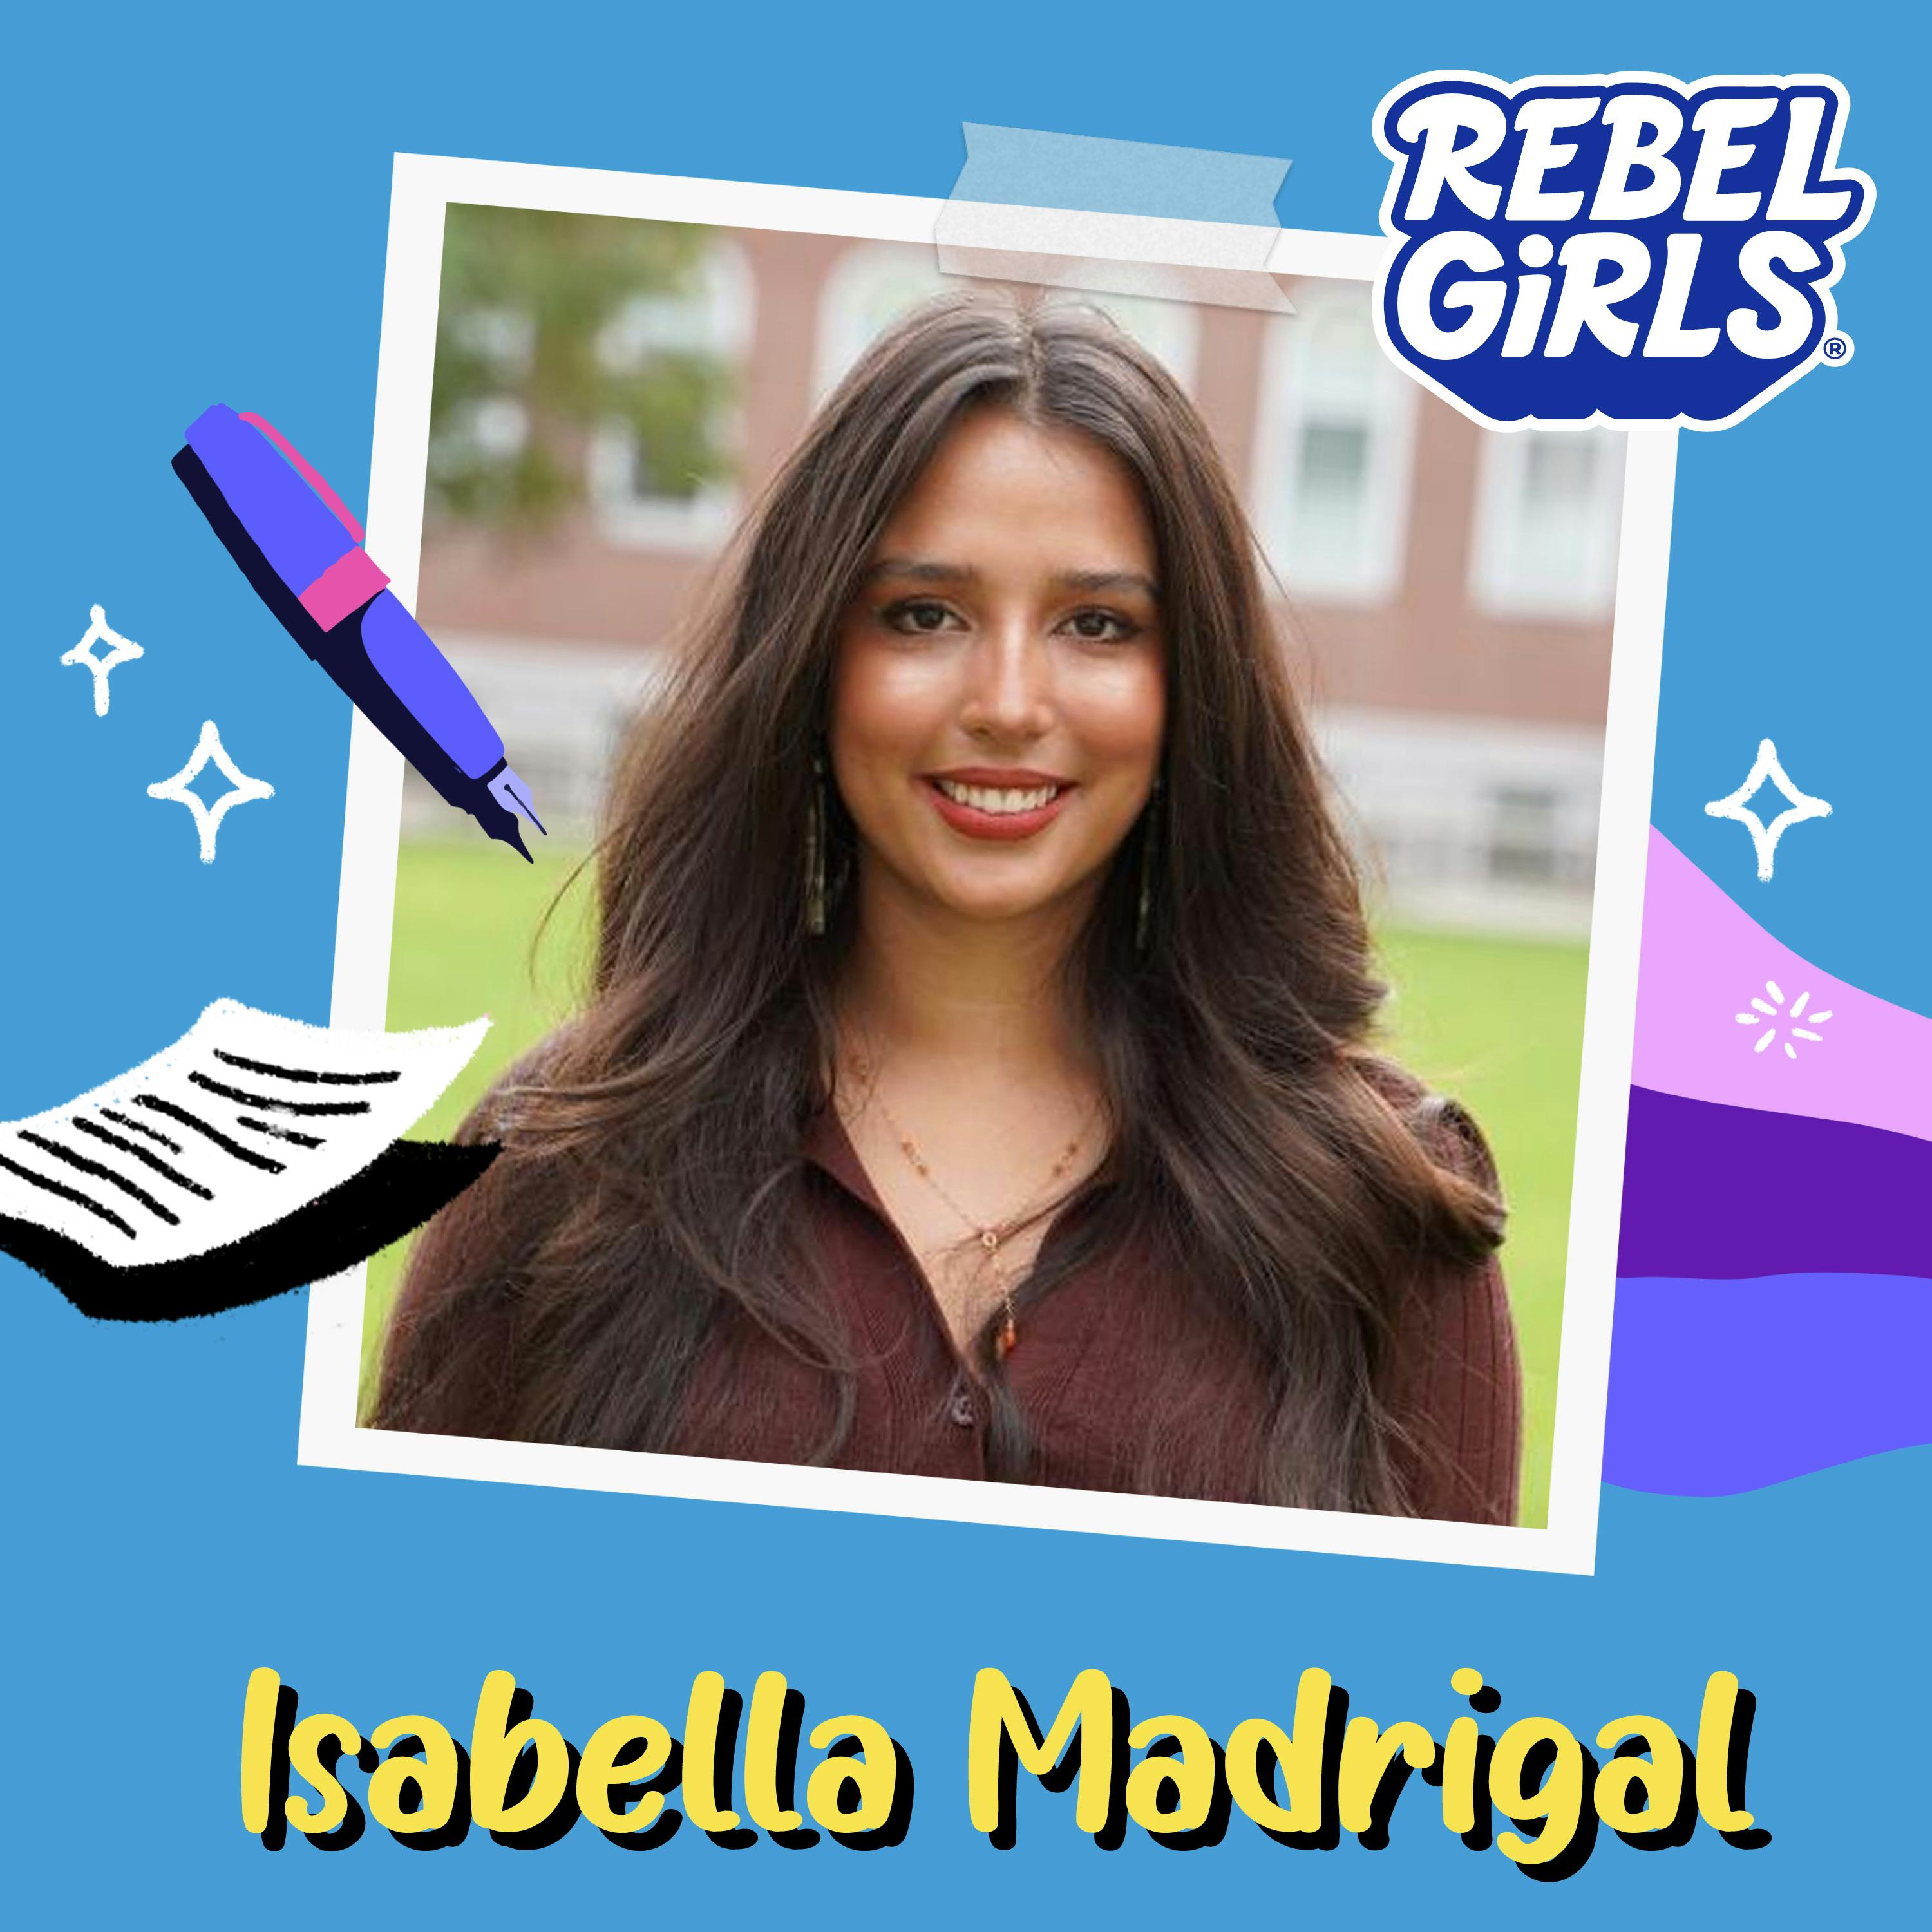 Get to Know Isabella Madrigal